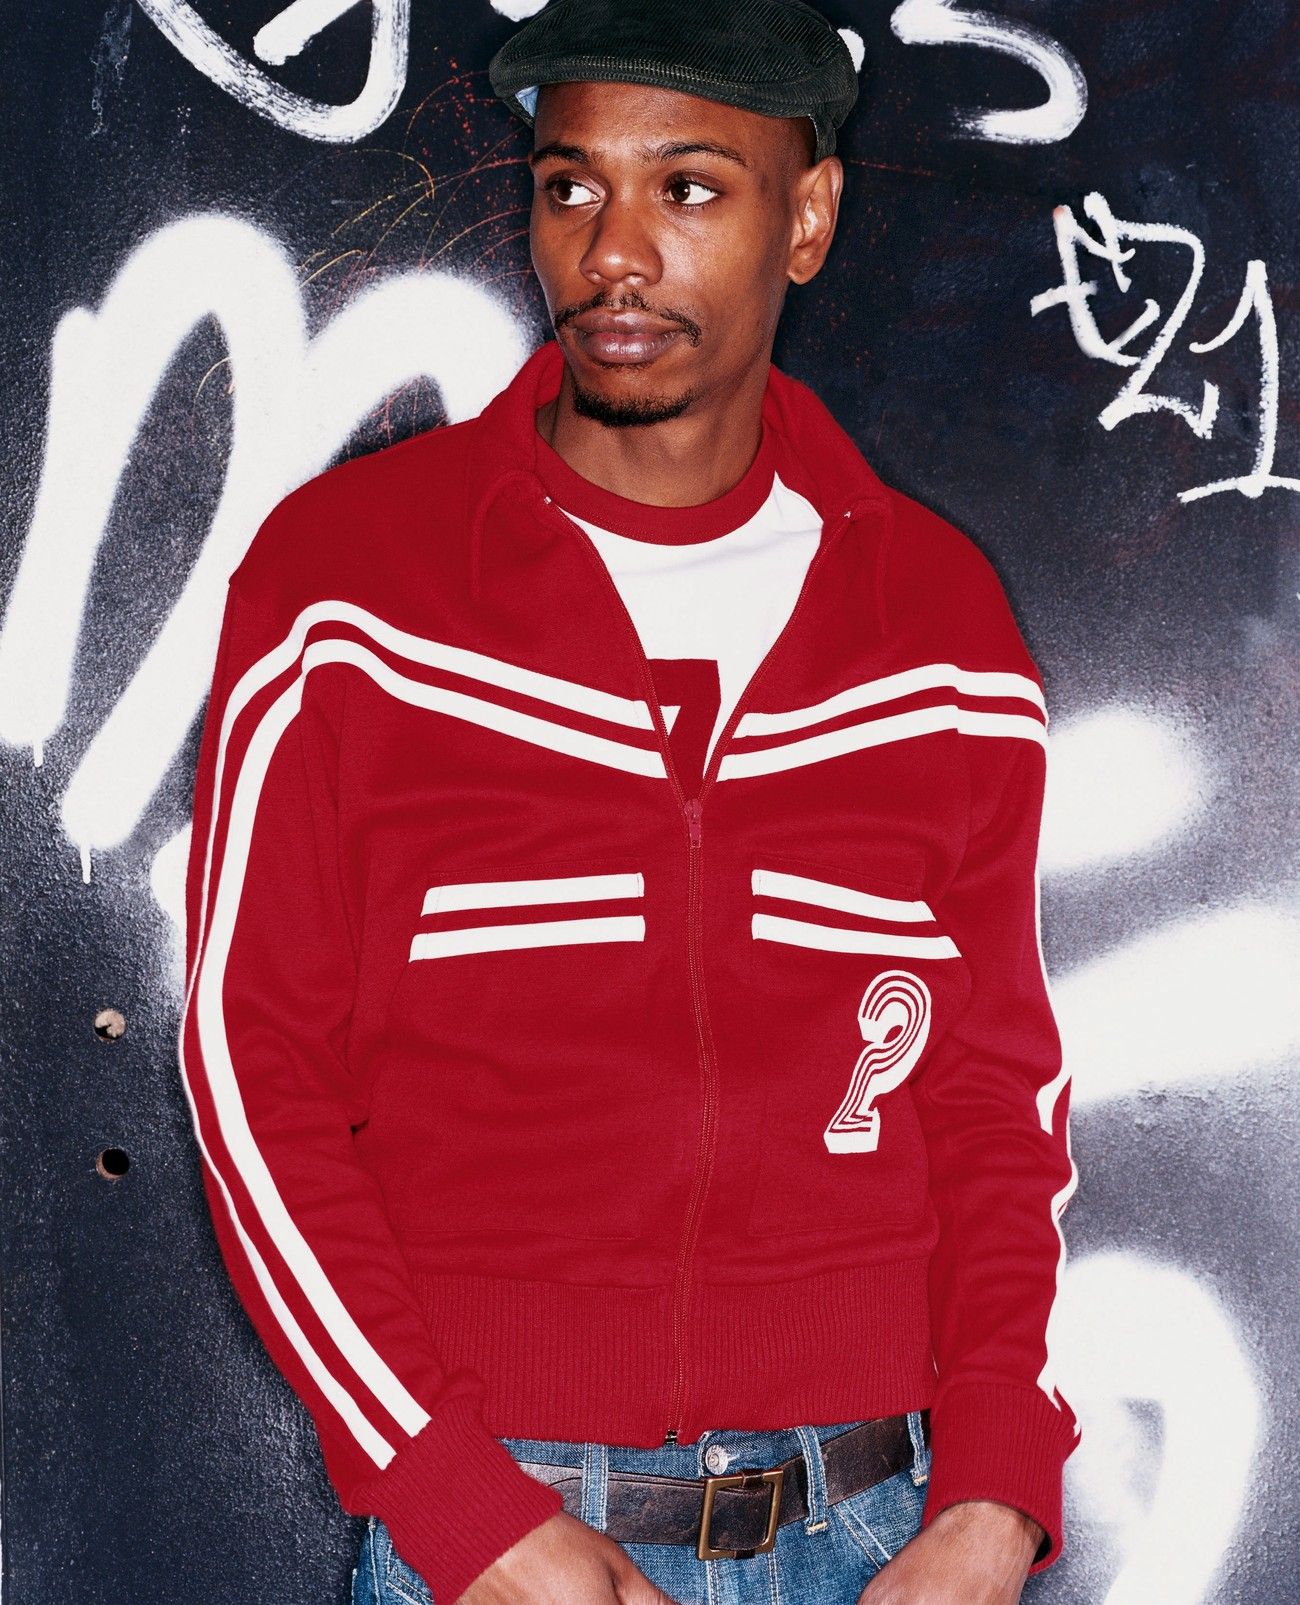 Dave chapelle with a red jacket